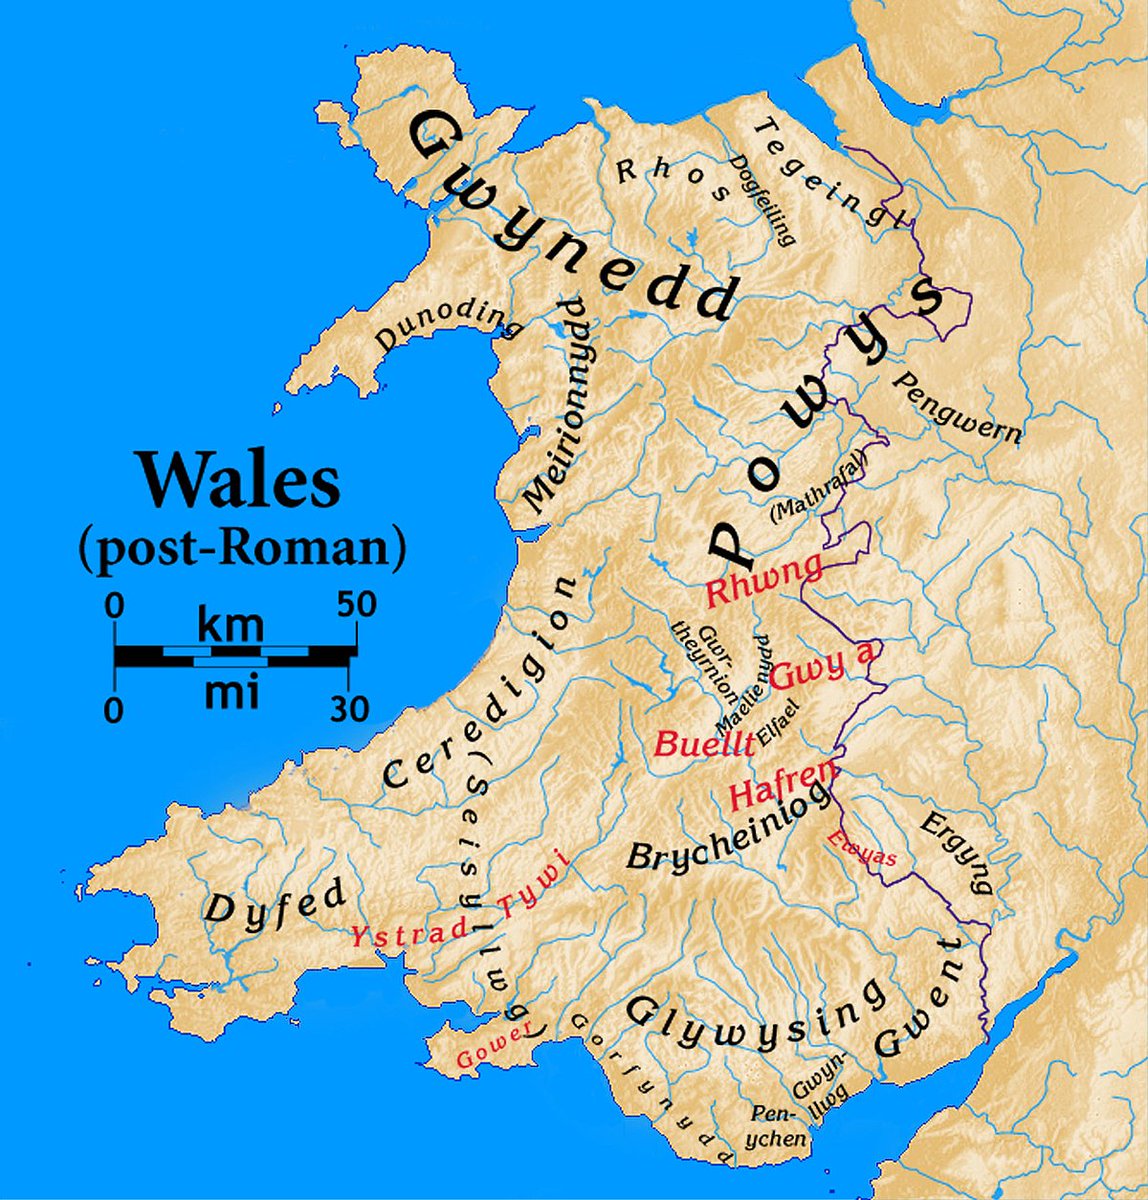 The people of Wales have traditionally accepted English venues for Arthurian legend because it acts as a reminder to the Welsh that, at one time, the entire island of Britain was theirs before the Saxon invasion.